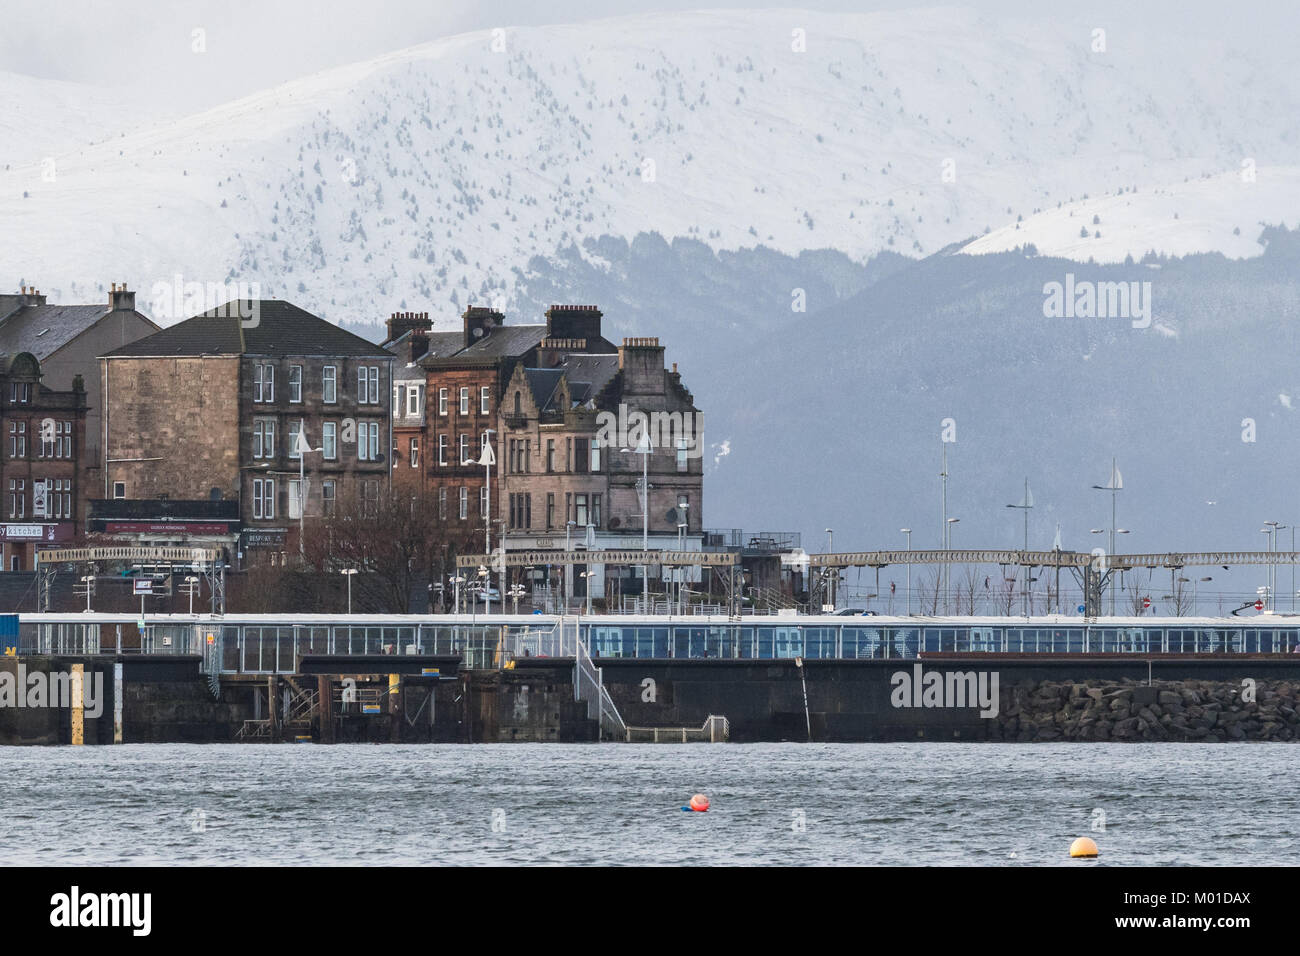 Gourock railway station and ScotRail train at the pierhead in winter, Gourock, Inverclyde, Scotland, UK Stock Photo